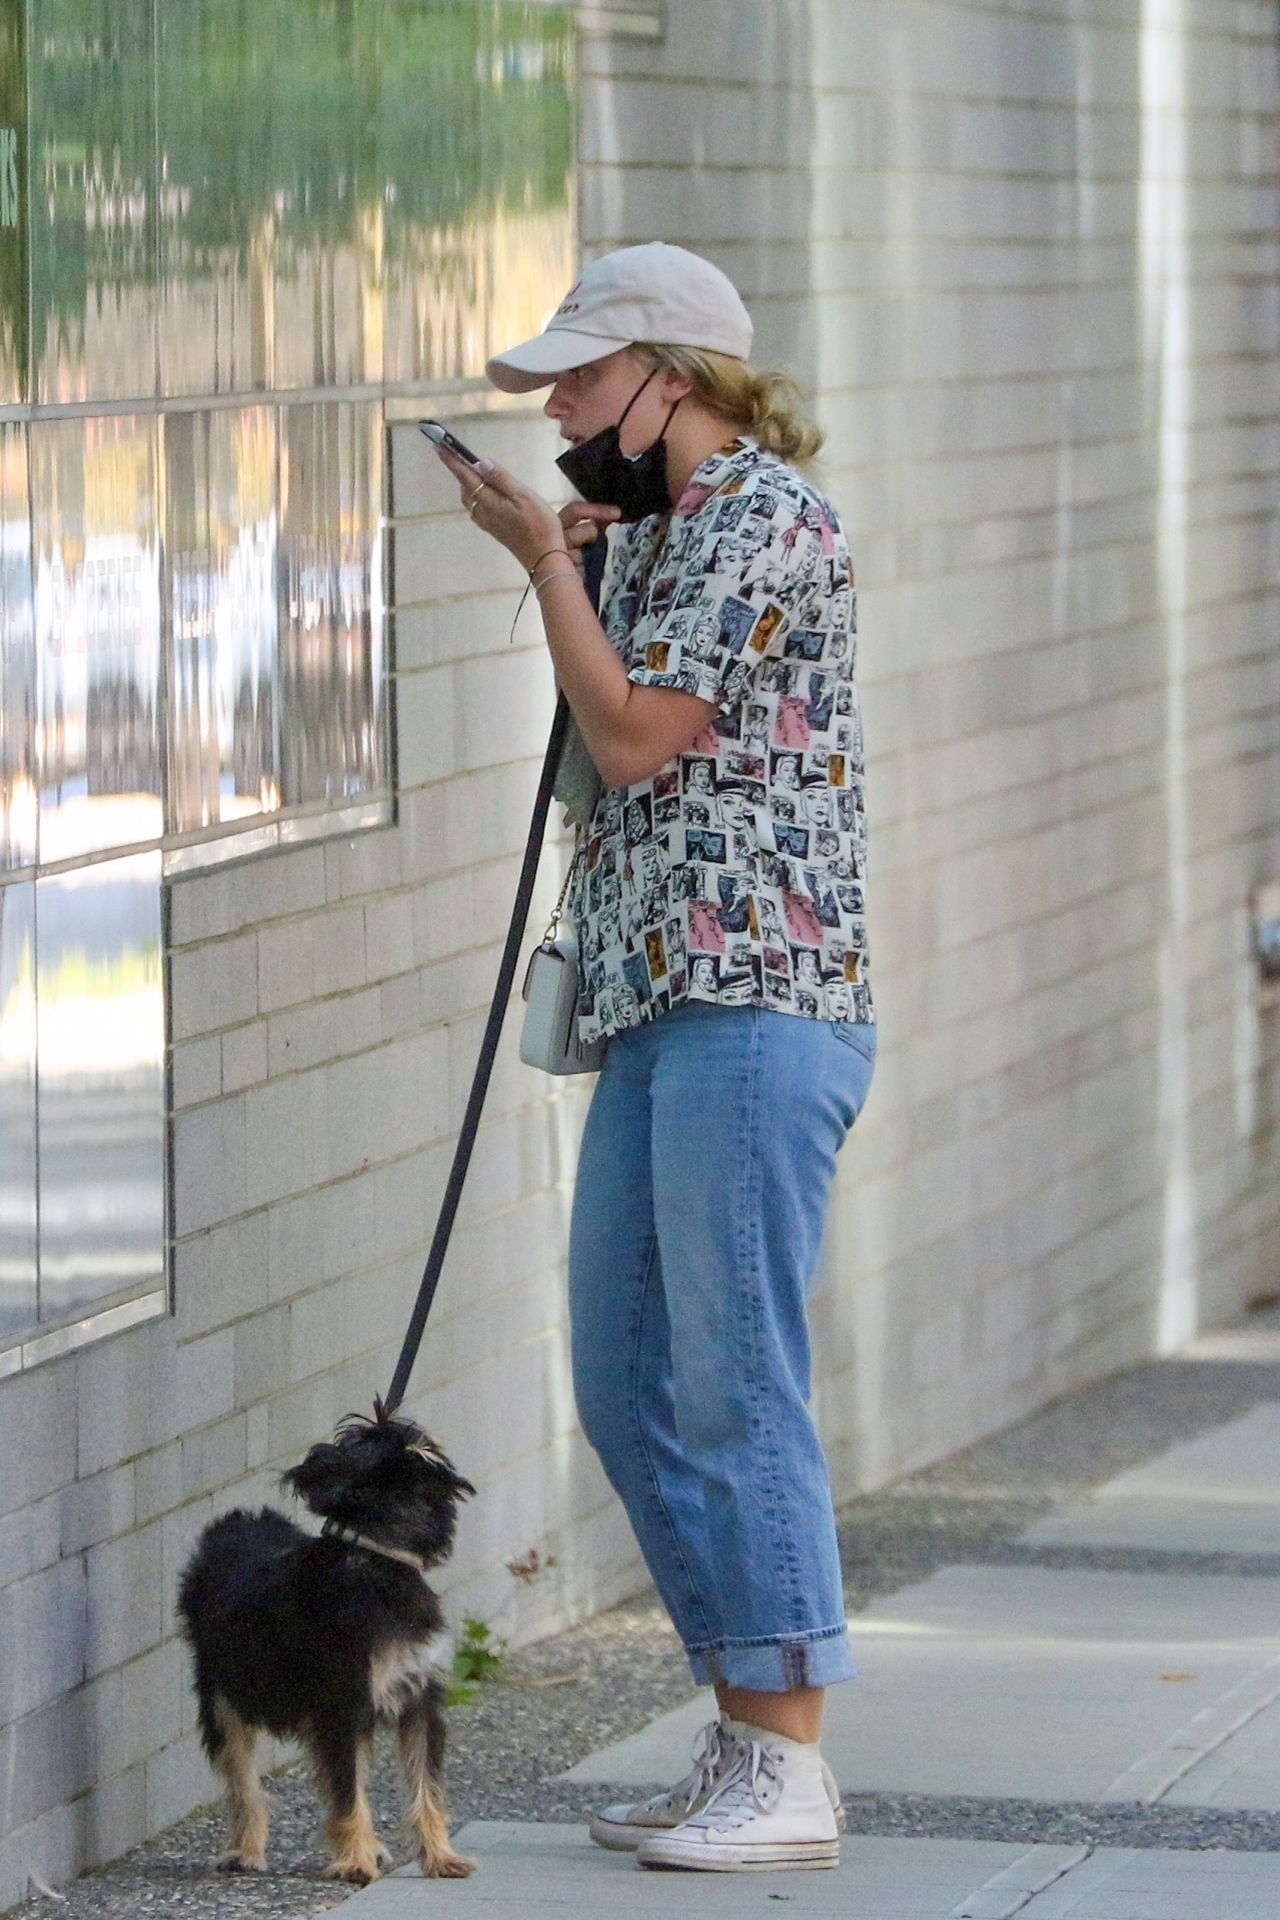 lili-reinhart-take-her-dog-for-a-walk-in-vancouver-09-06-2020-3.jpg